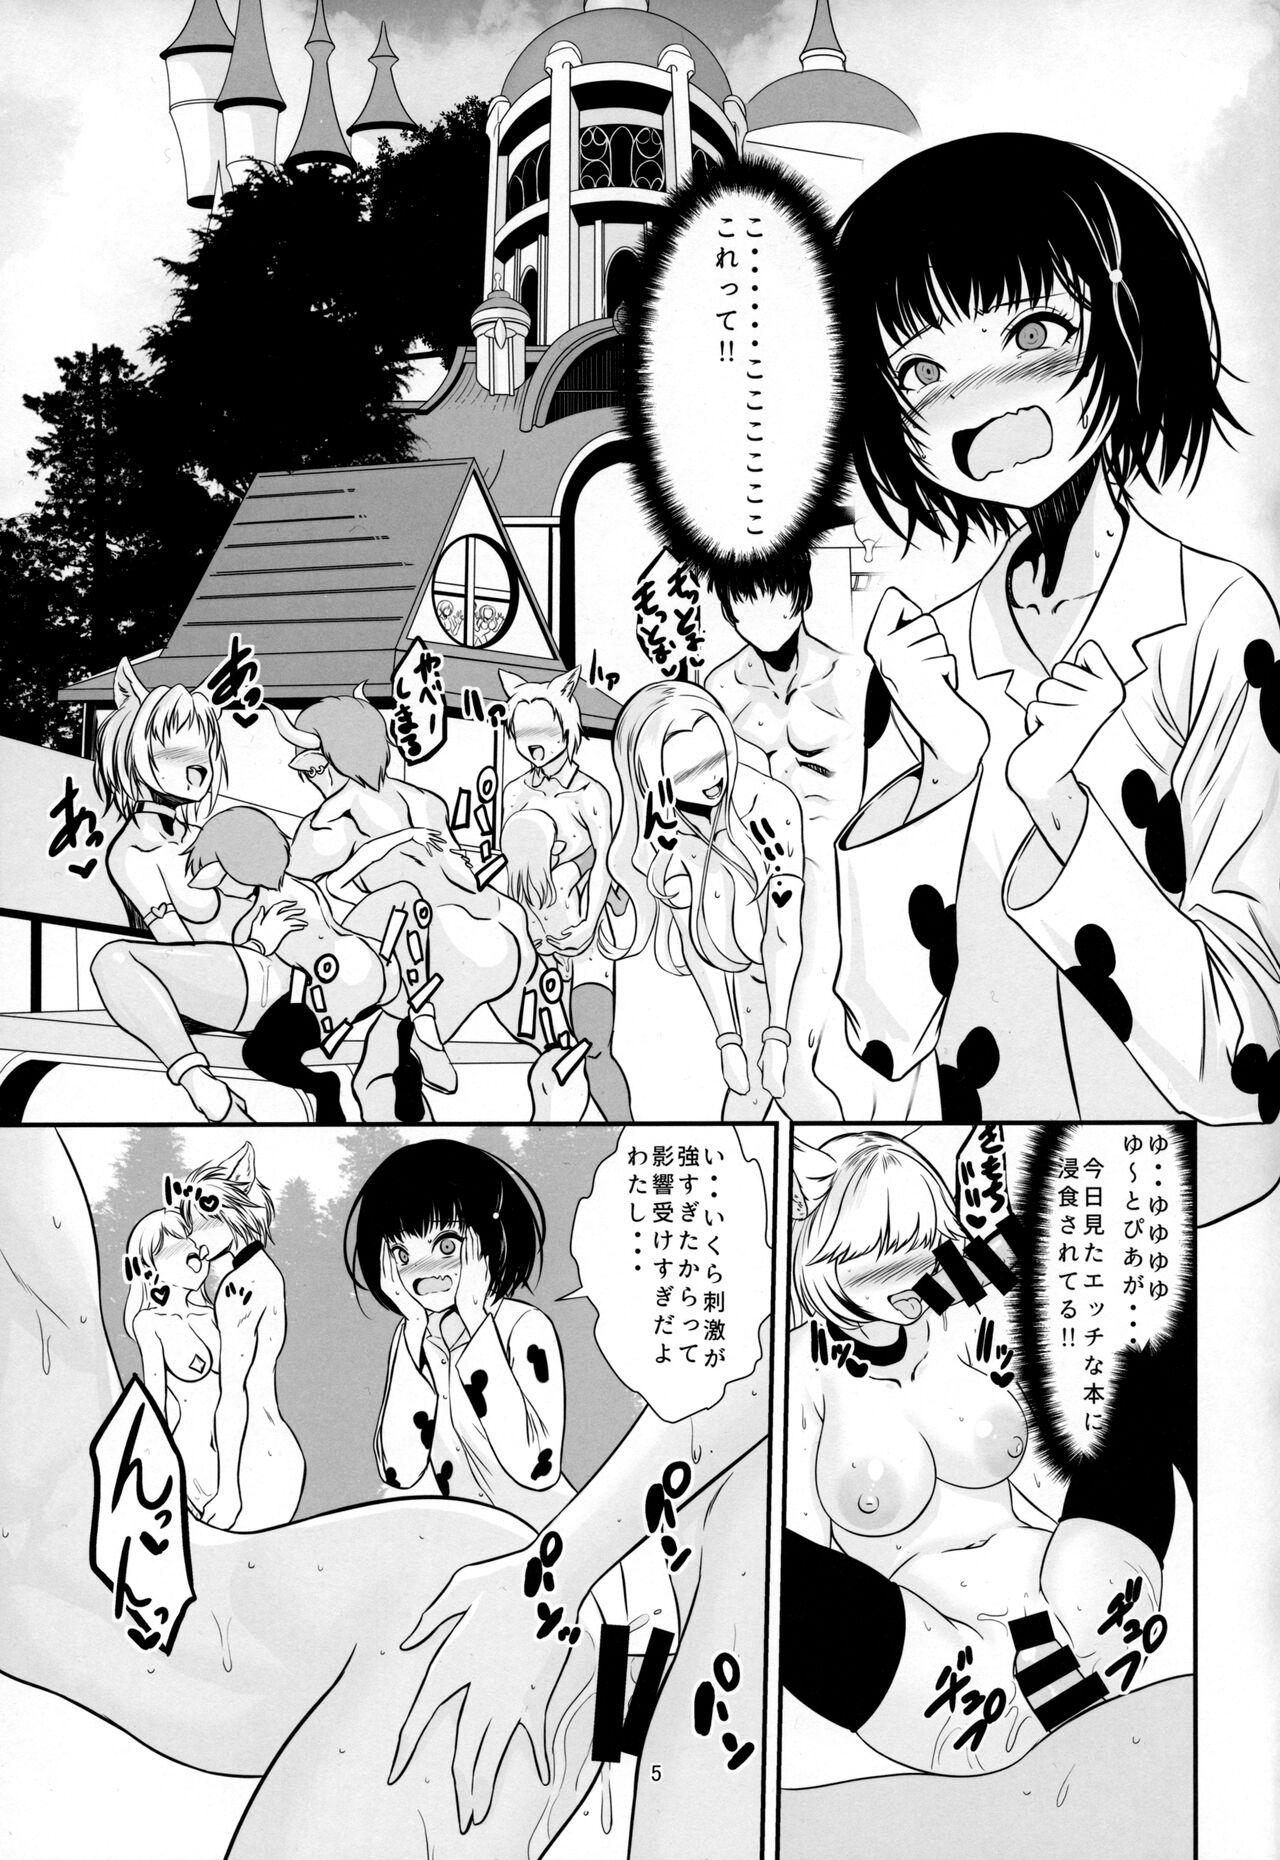 Striptease Welcome to the Intopia - Granblue fantasy Party - Page 4